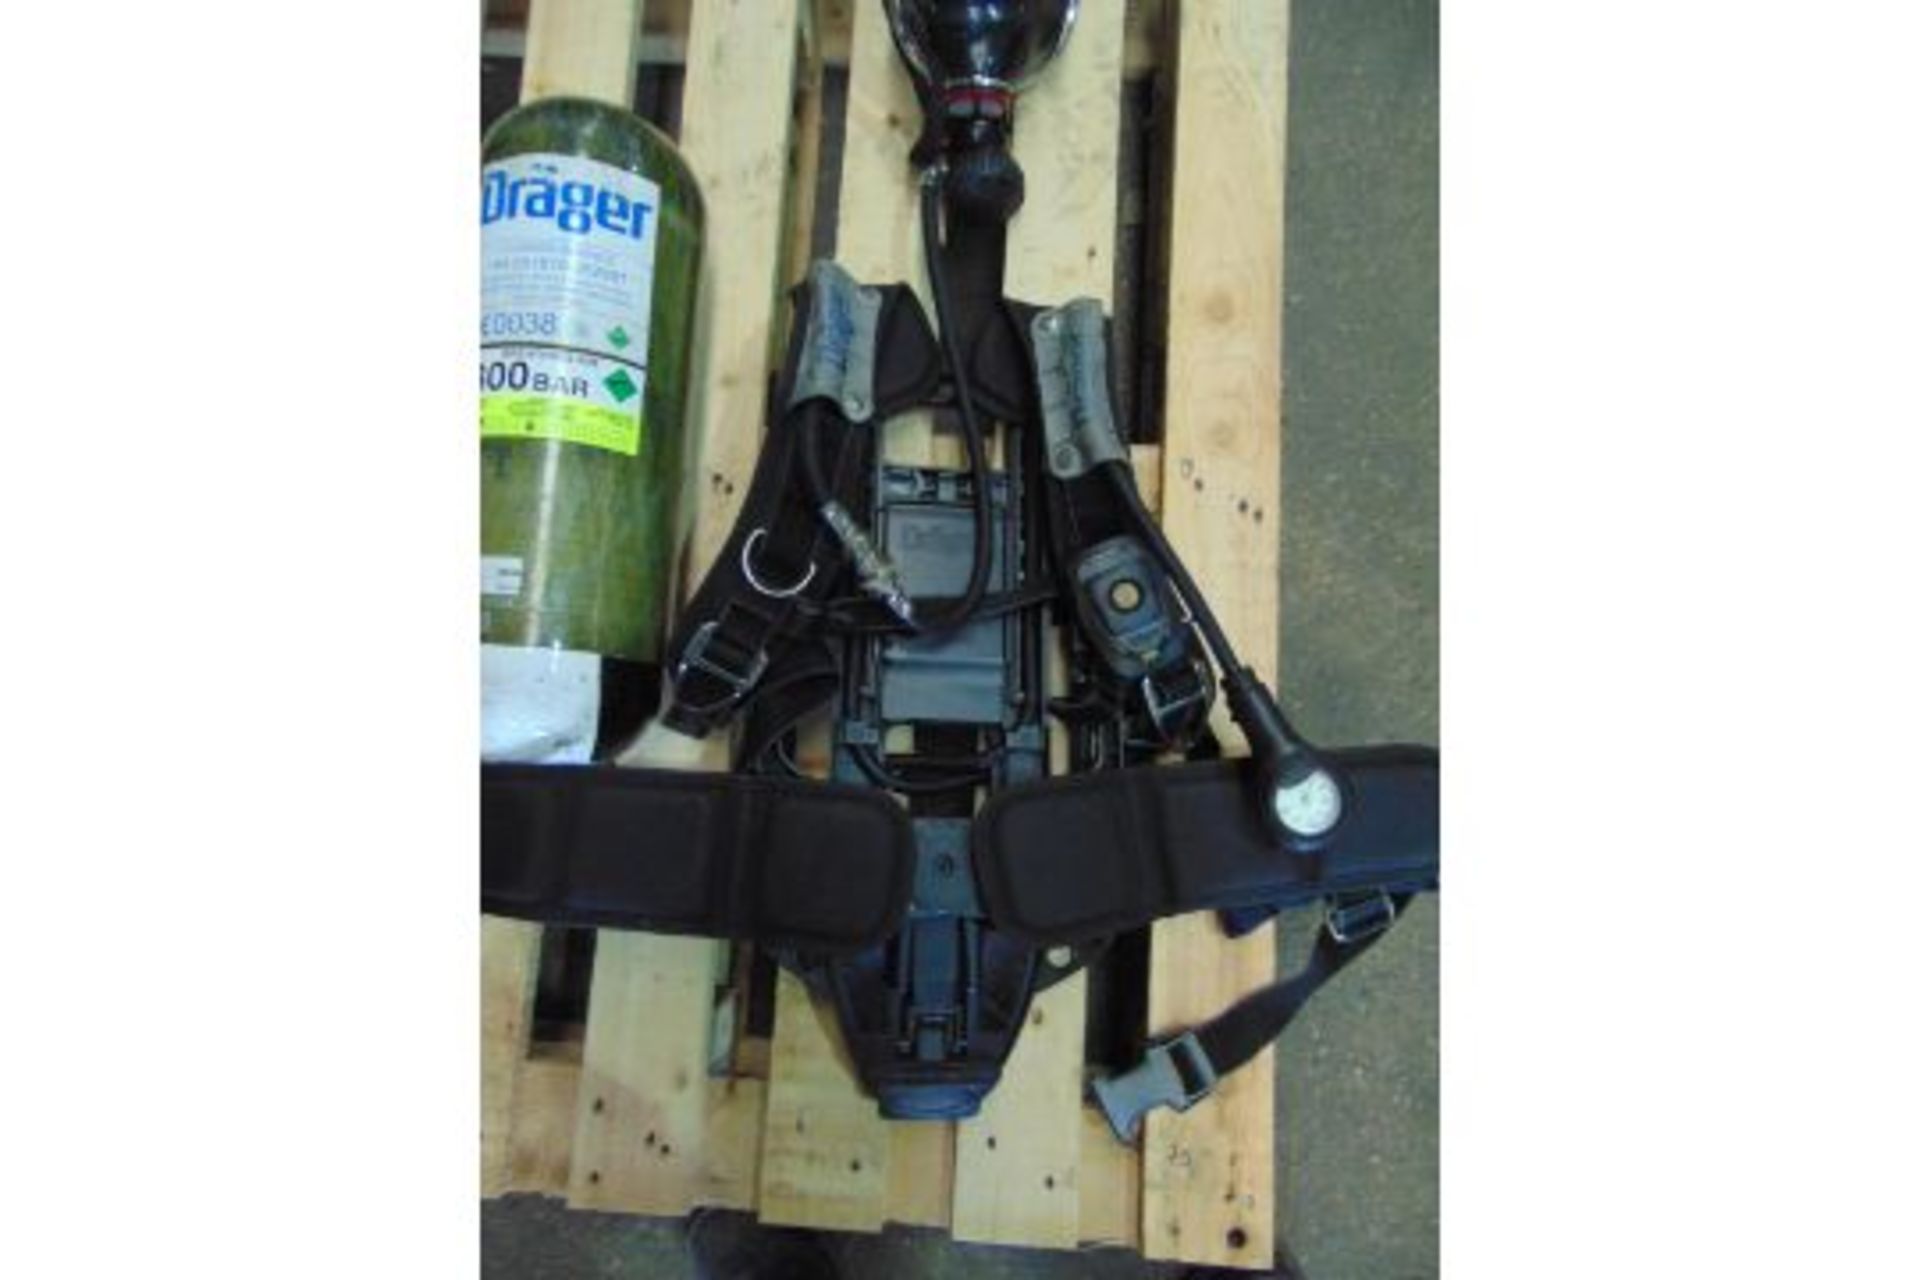 Drager PSS 7000 Self Contained Breathing Apparatus w/ 2 x Drager 300 Bar Air Cylinders - Bild 10 aus 18